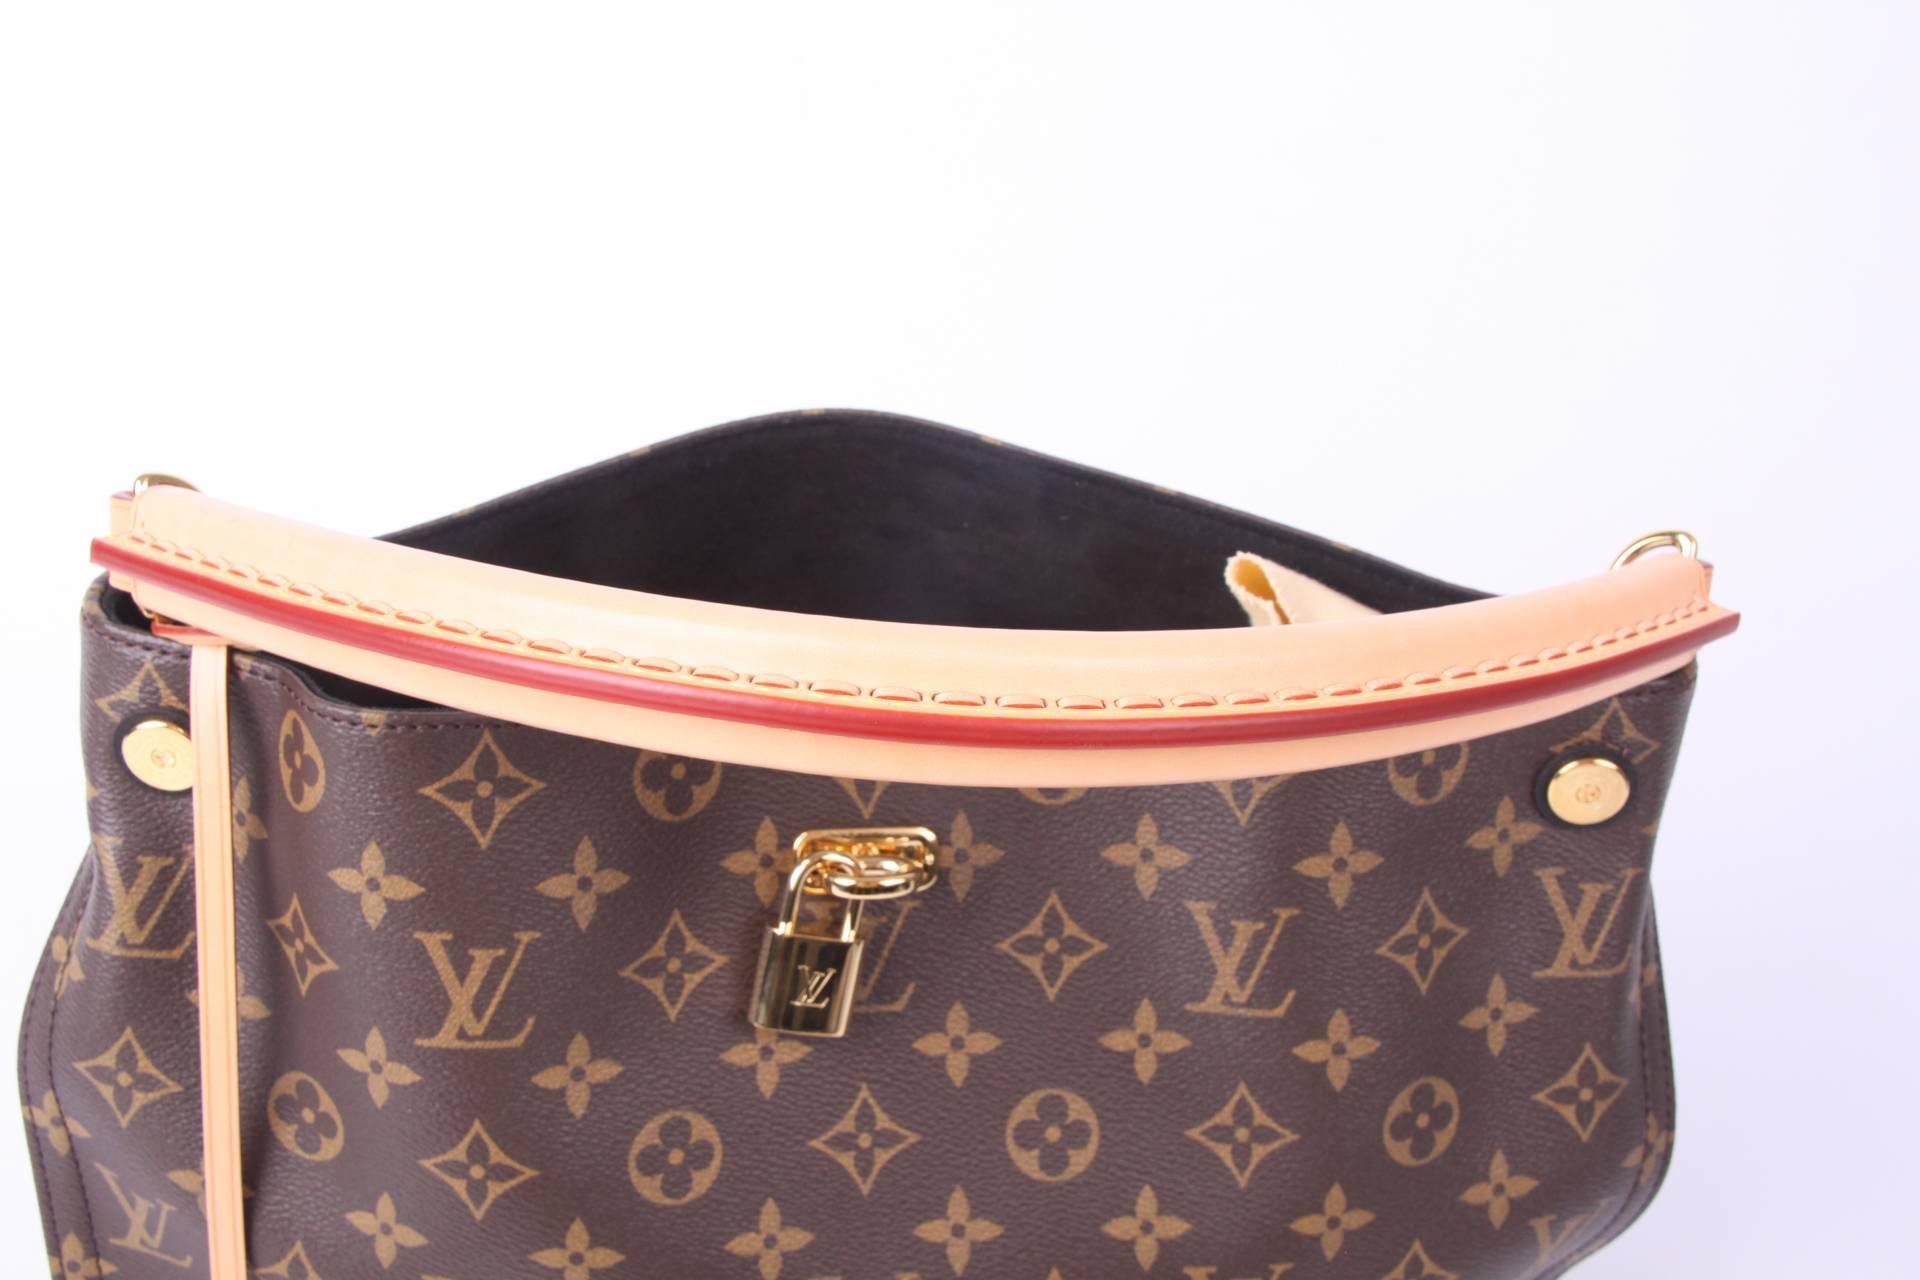 The Louis Vuitton Gaia Bag is a fantastic piece to add to your bag collection!

A rather large size, the front and back are made of dark brown canvas covered with the welknown LV monograms. The sides are crafted in black leather. Gold-tone